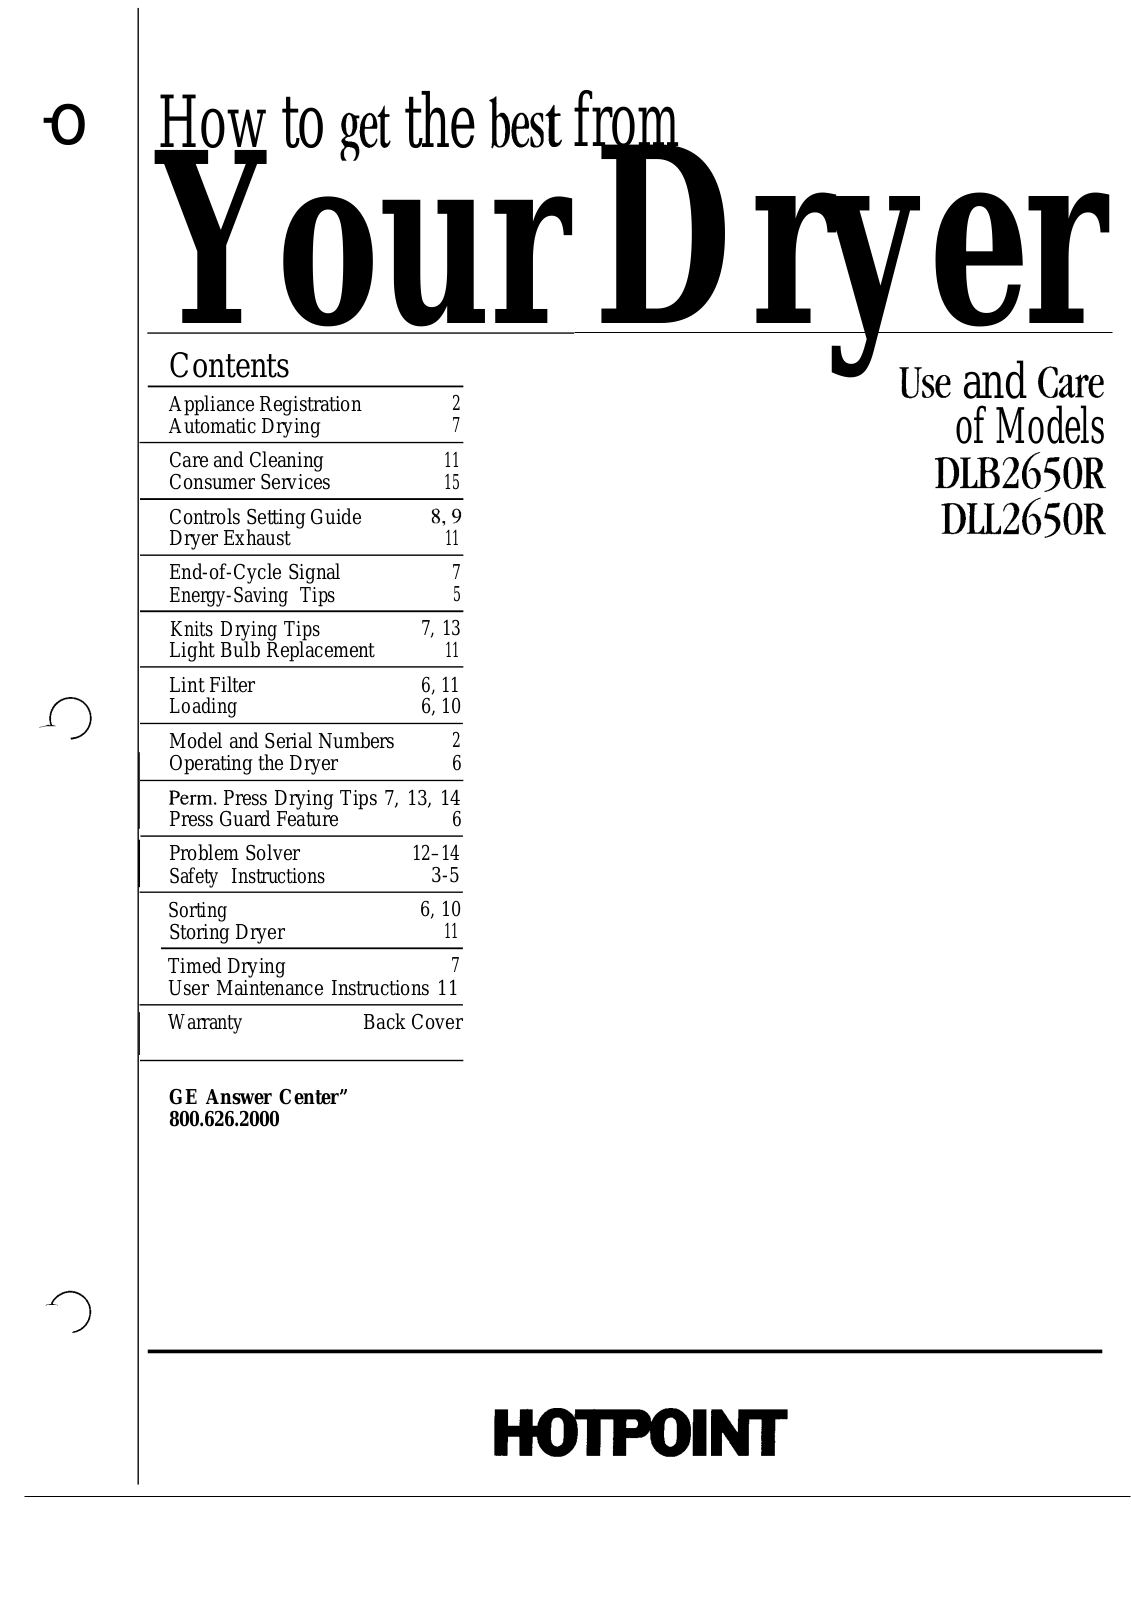 GE DLL2650R, DLB2650R Use and Care Manual